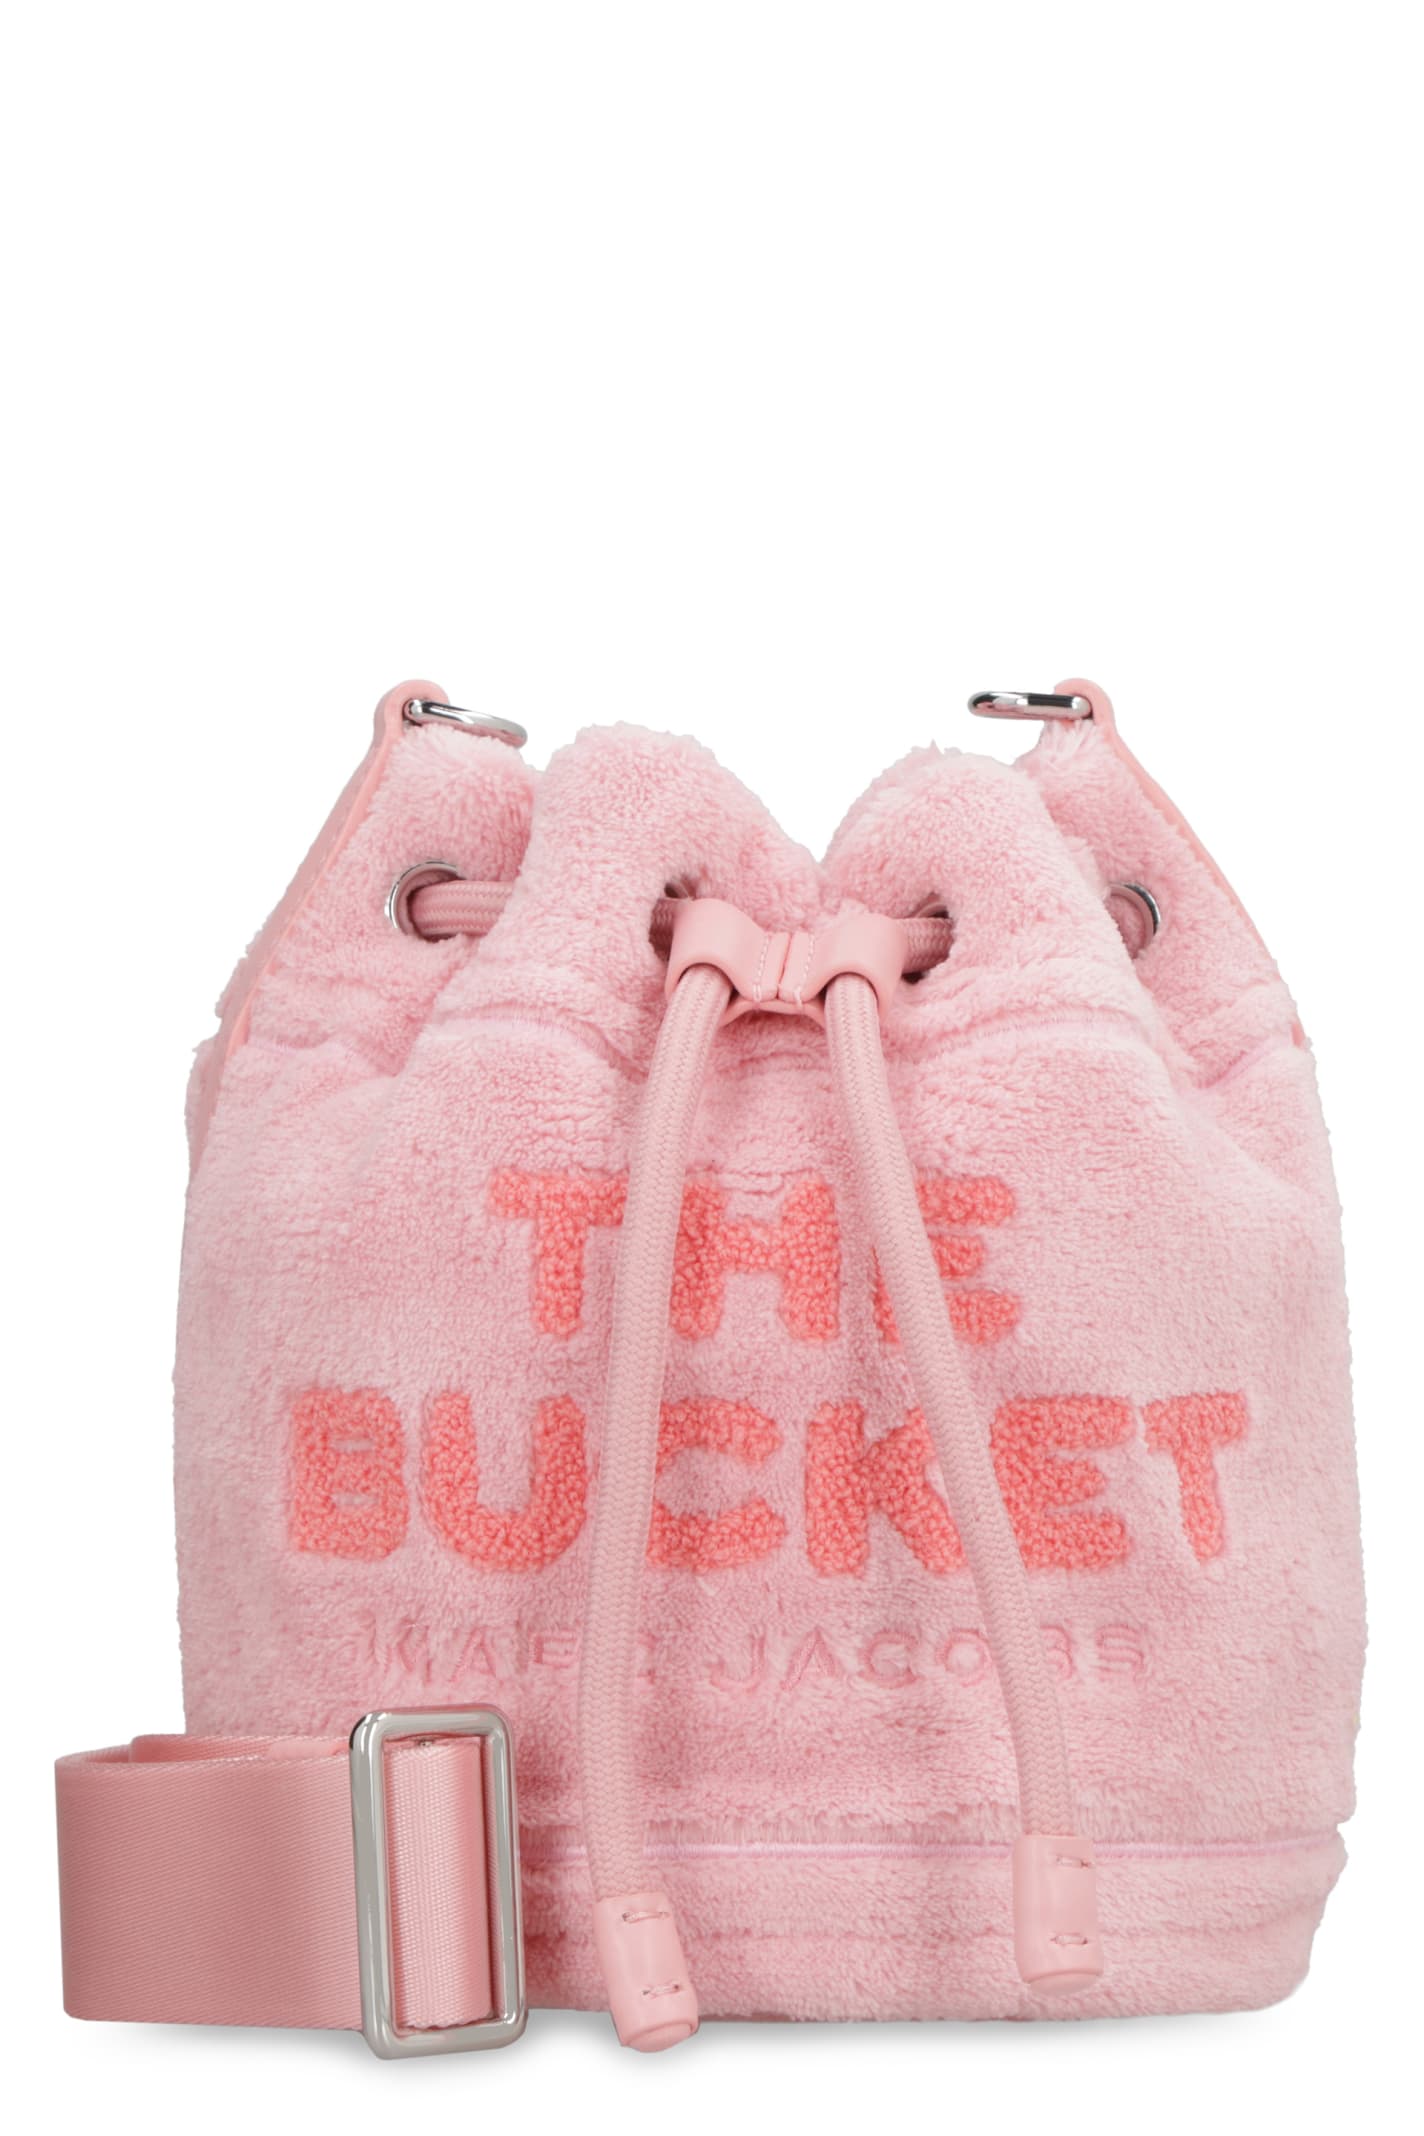 Marc Jacobs Womens Rose The Bucket Leather Bucket Bag In Pink